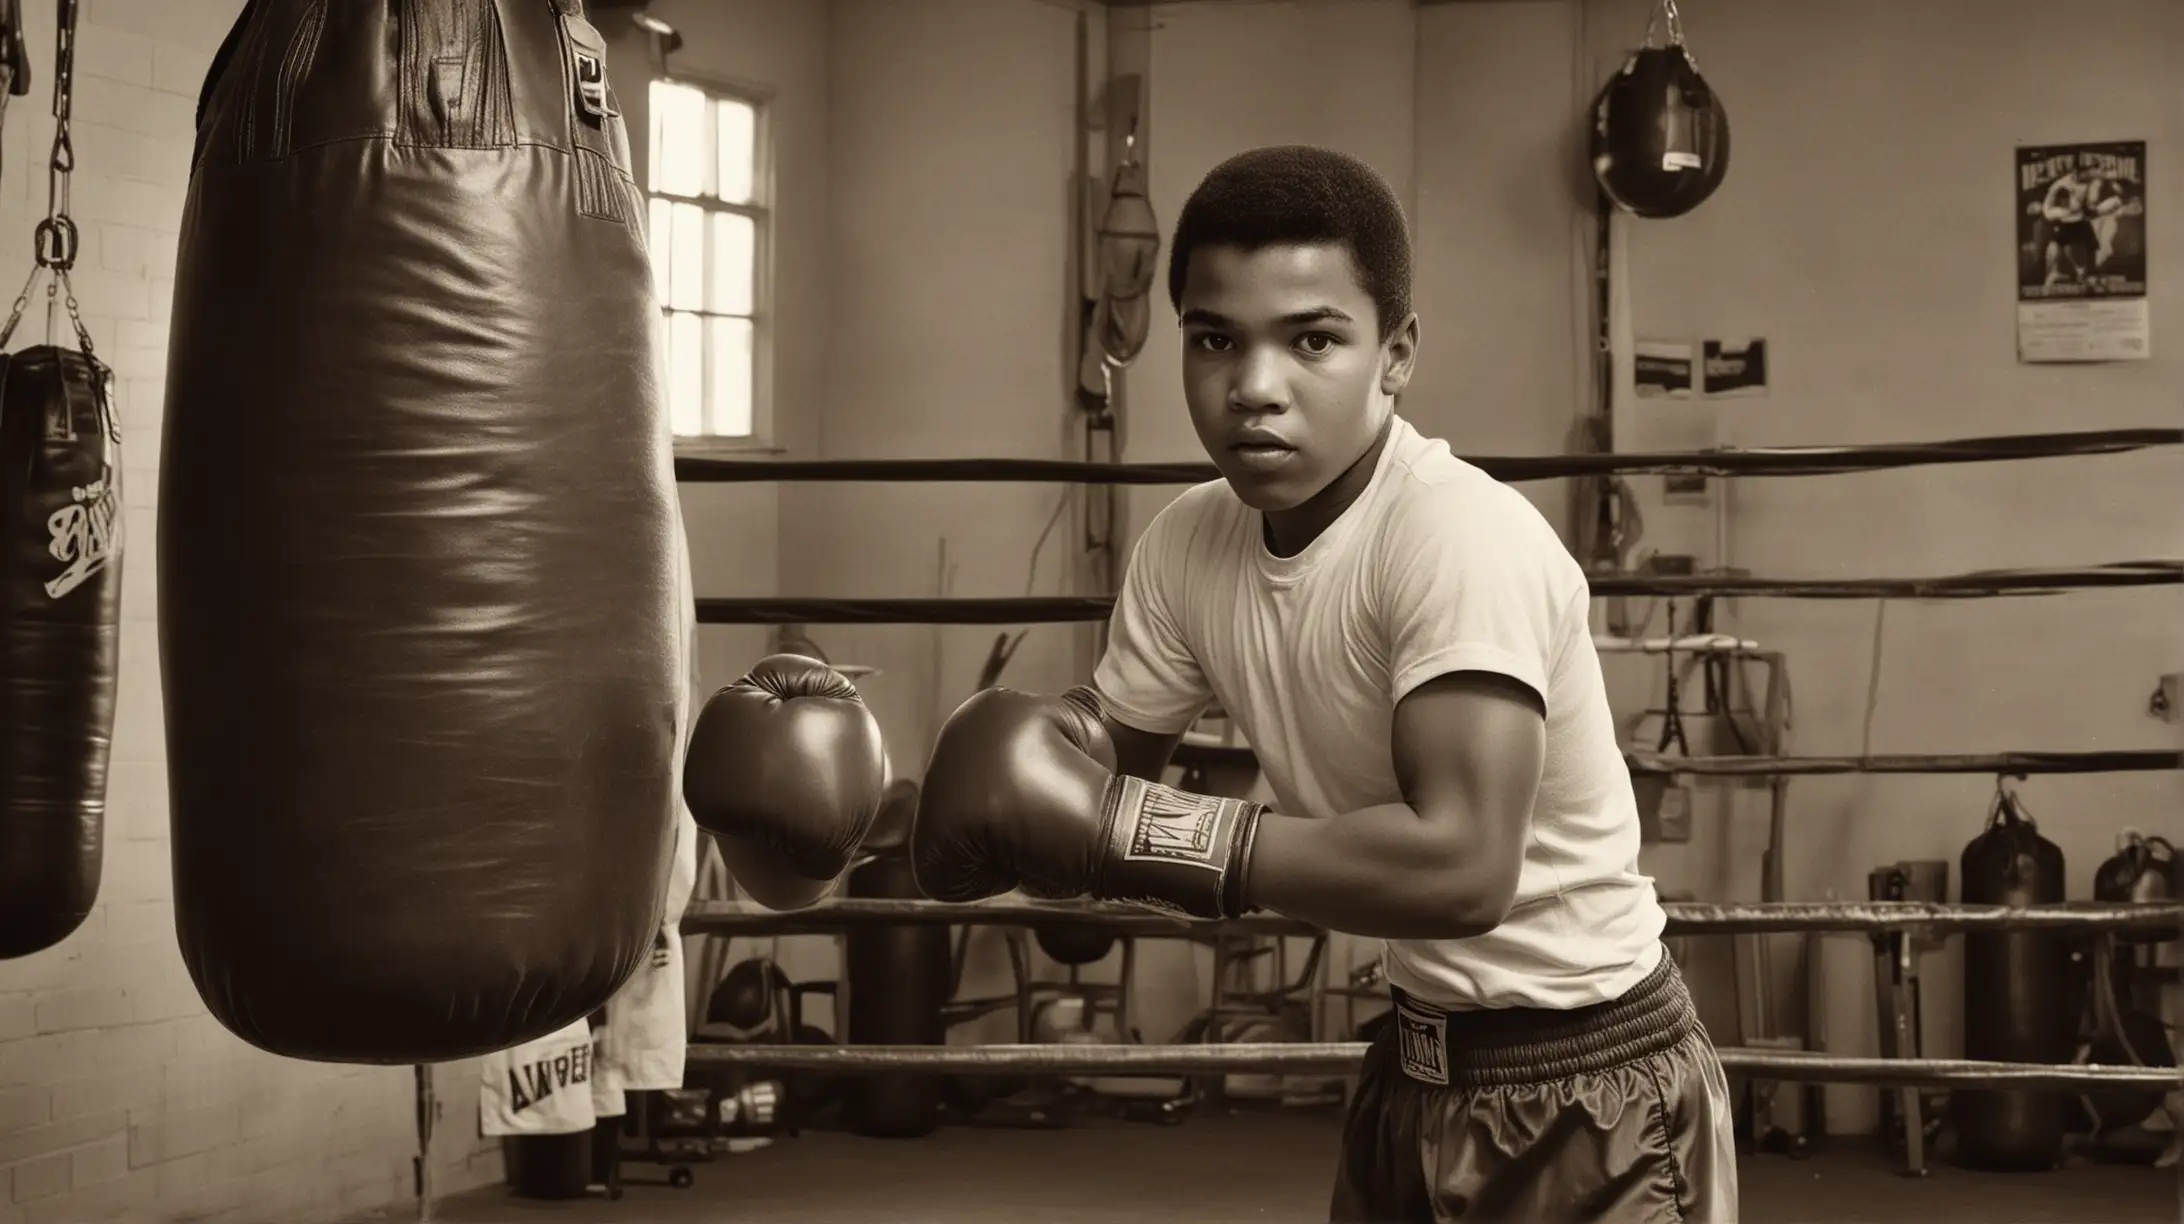 Visualization Prompt: Visualize Muhammad Ali's early boxing training at a local gym, showcasing his determination and youth.
Image Description: A young Muhammad Ali, around 12 years old, is seen in a dimly lit gym, his lean and athletic build evident as he punches a heavy bag. His eyes are focused and determined. An old trainer, resembling Joe Martin, watches from the side, offering guidance. The gym is filled with vintage boxing equipment, creating an authentic 1950s atmosphere.